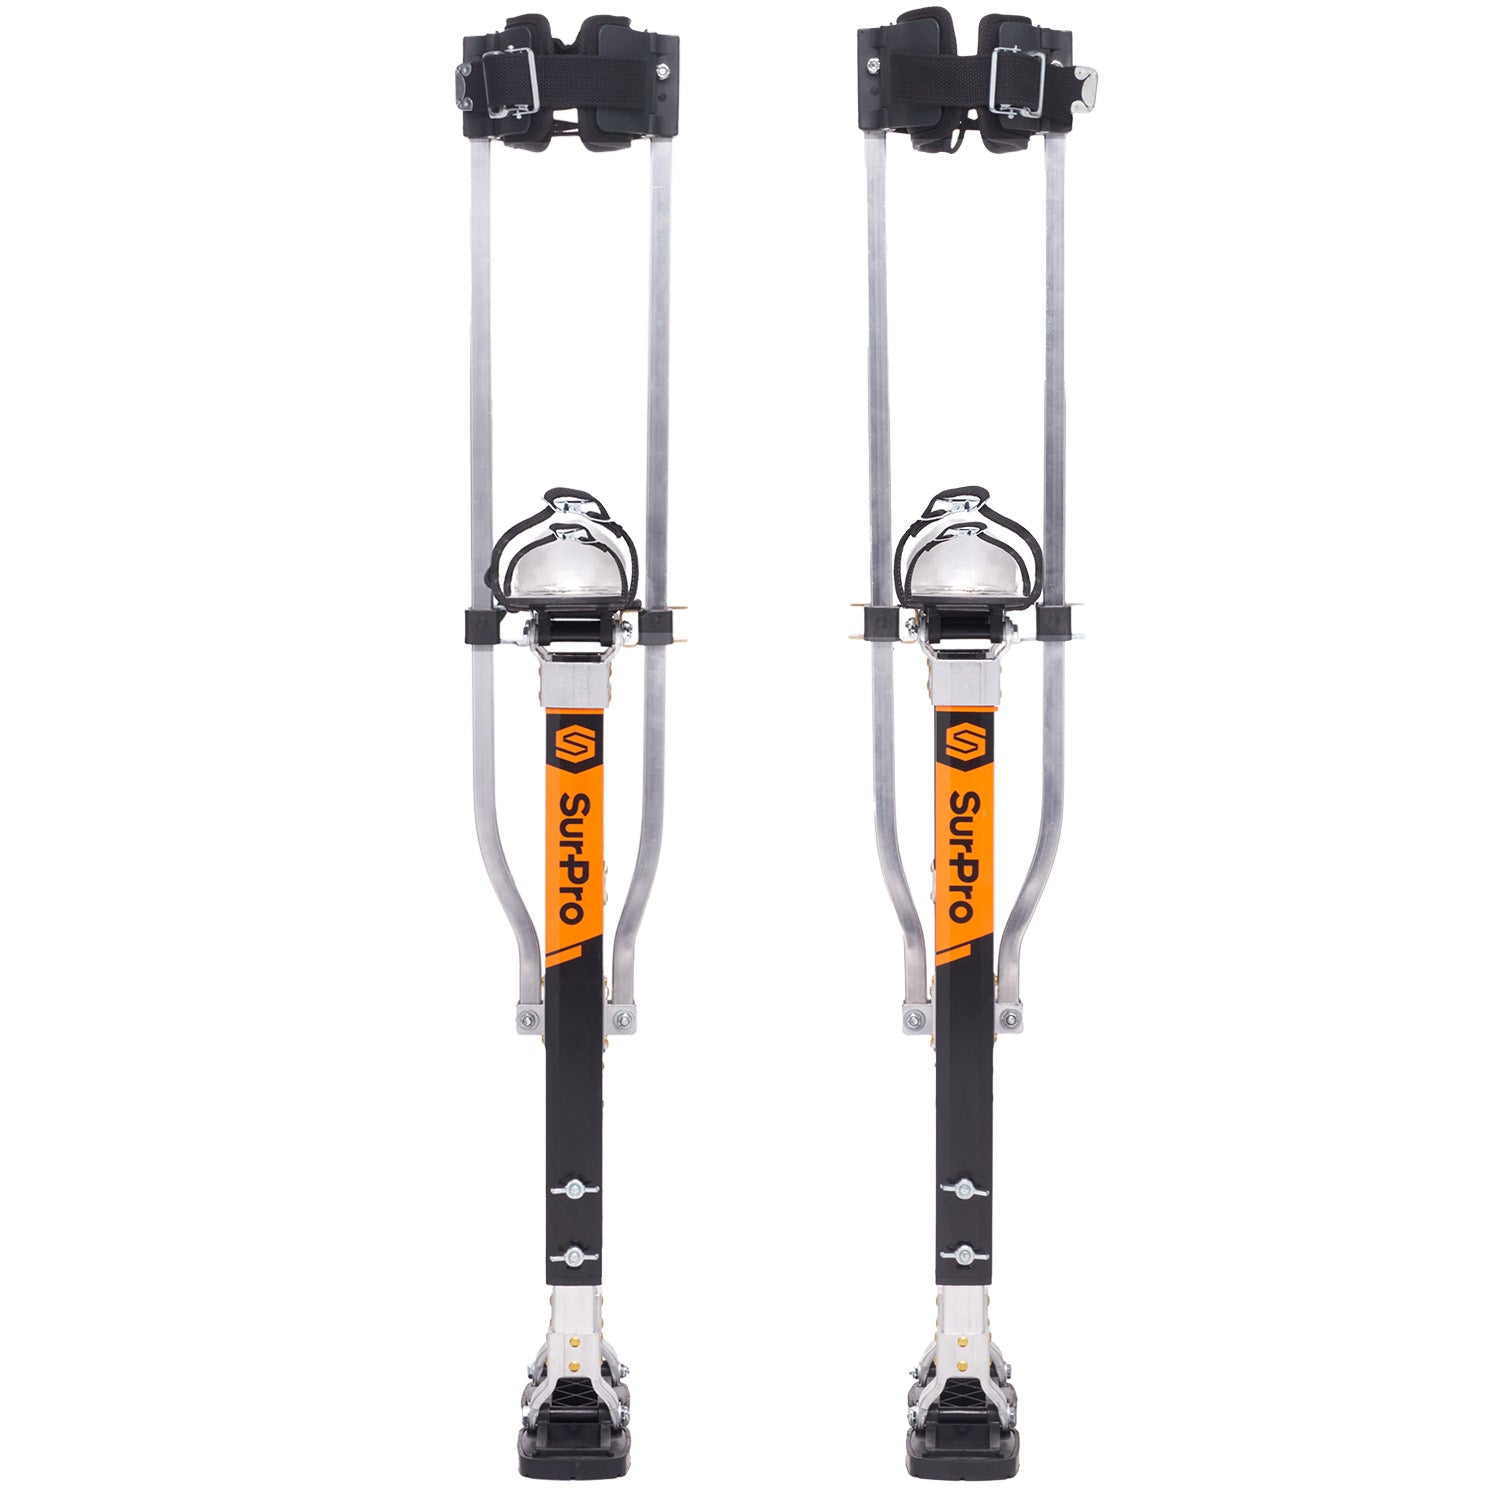 S2 Magnesium Drywall Stilts also known as S2 Mag Stilts